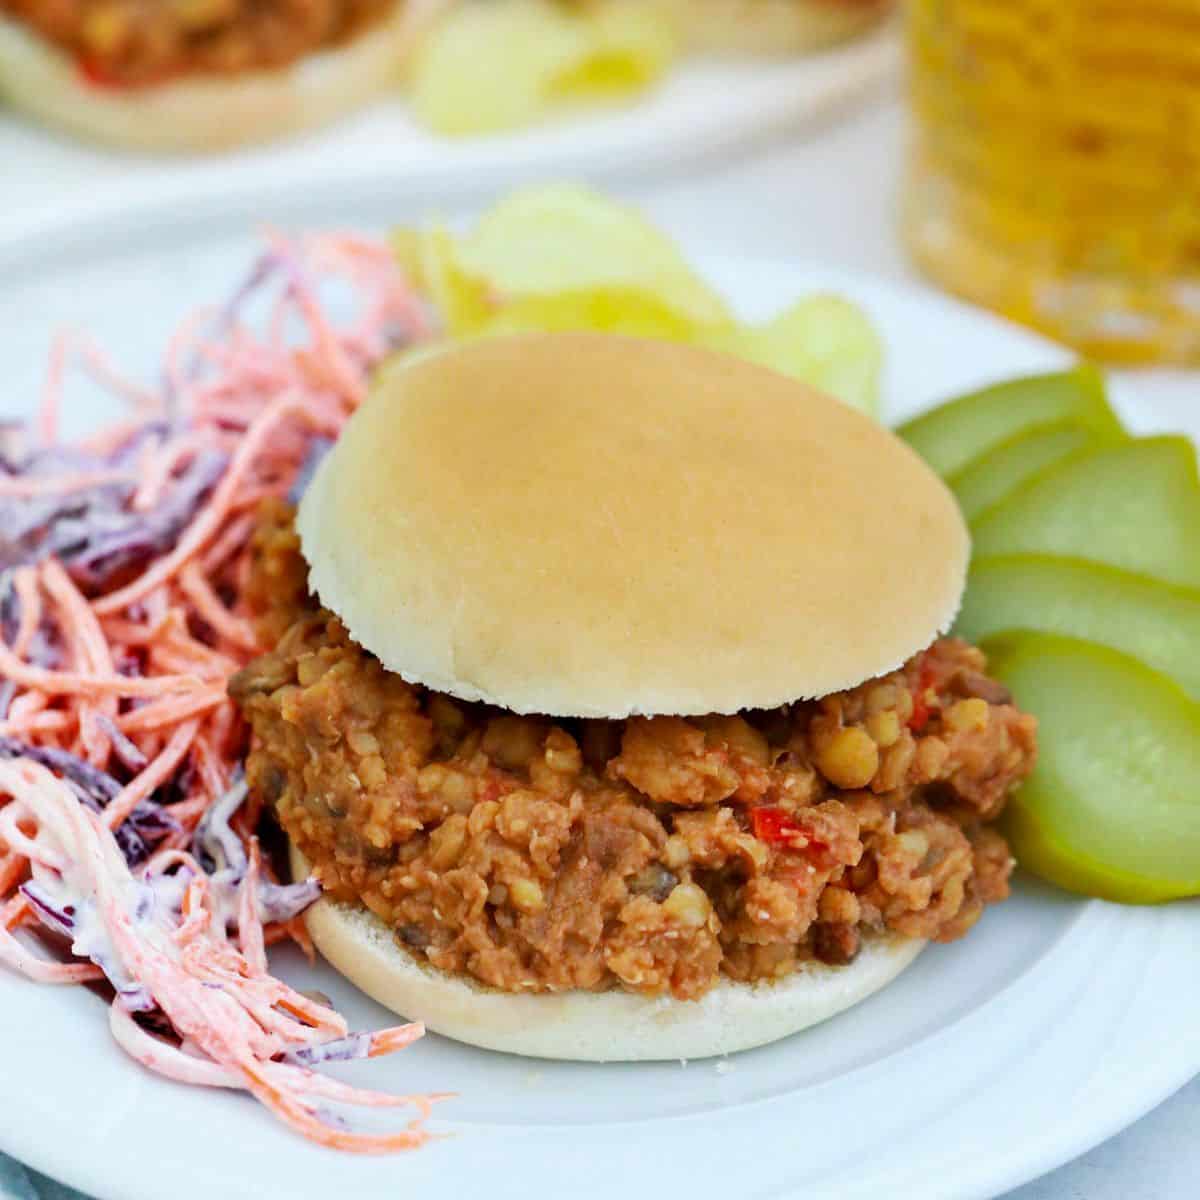 Sloppy joe sandwich with pickles and coleslaw on the side.